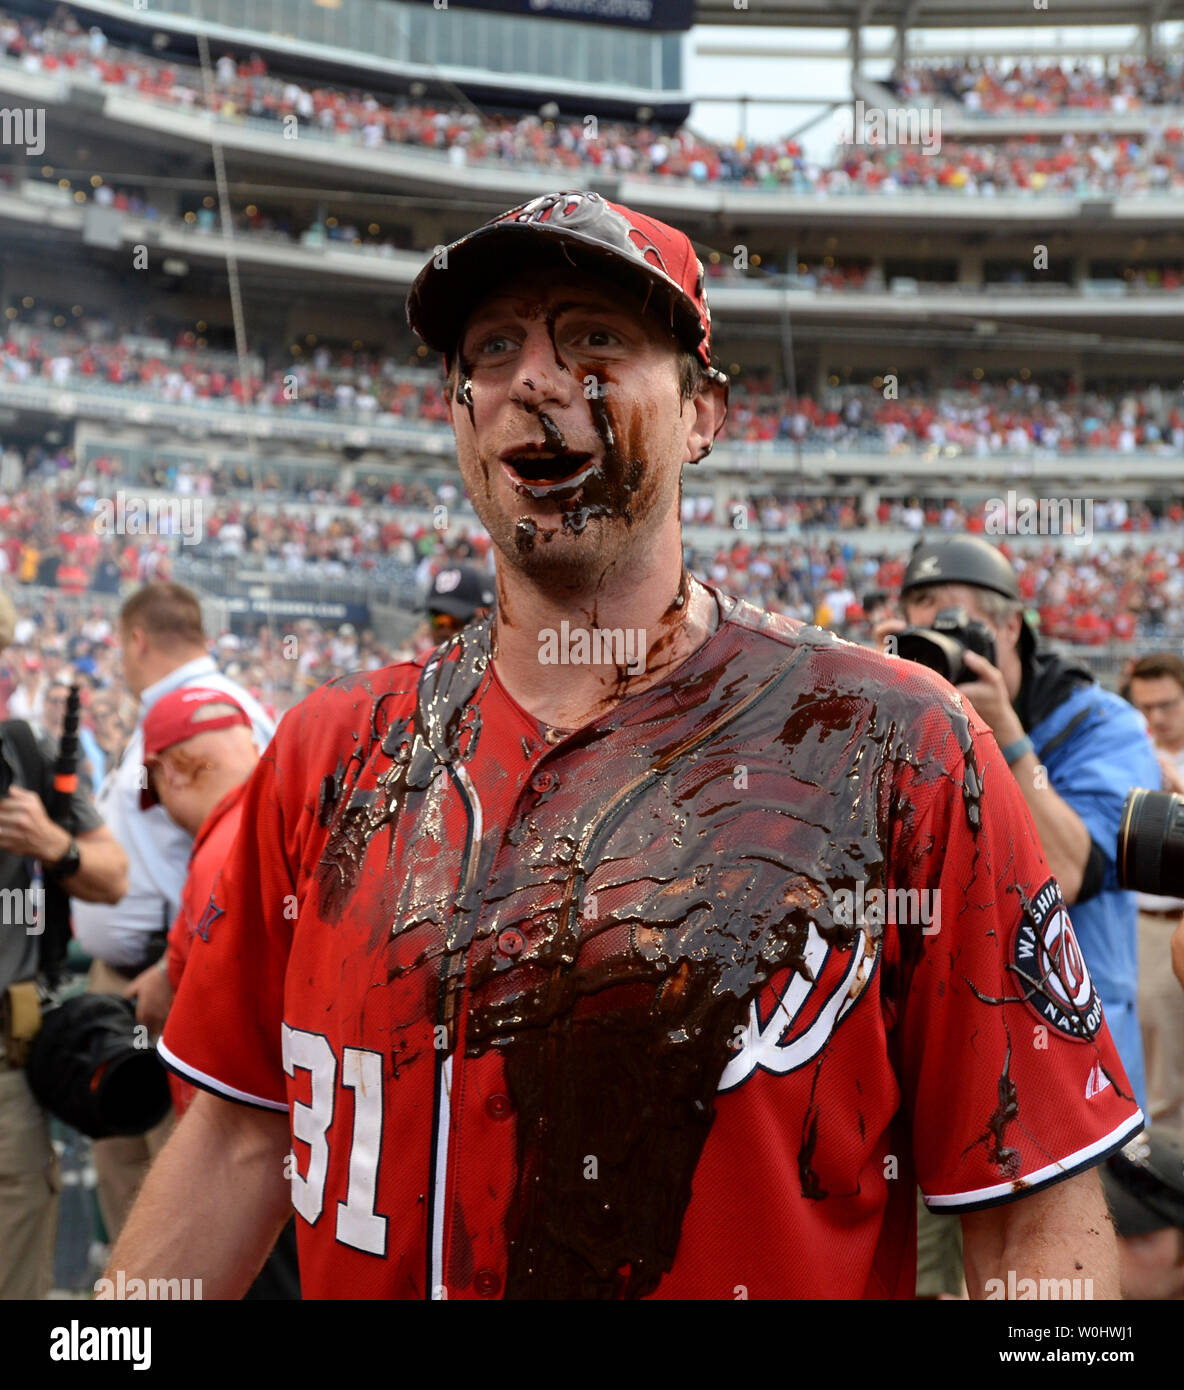 Washington Nationals Max Scherzer can only smile as he is drenched in  celebratory chocolate syrup after pitching a no-hitter against the  Pittsburgh Pirates at Nationals Park on June 20, 2015 in Washington